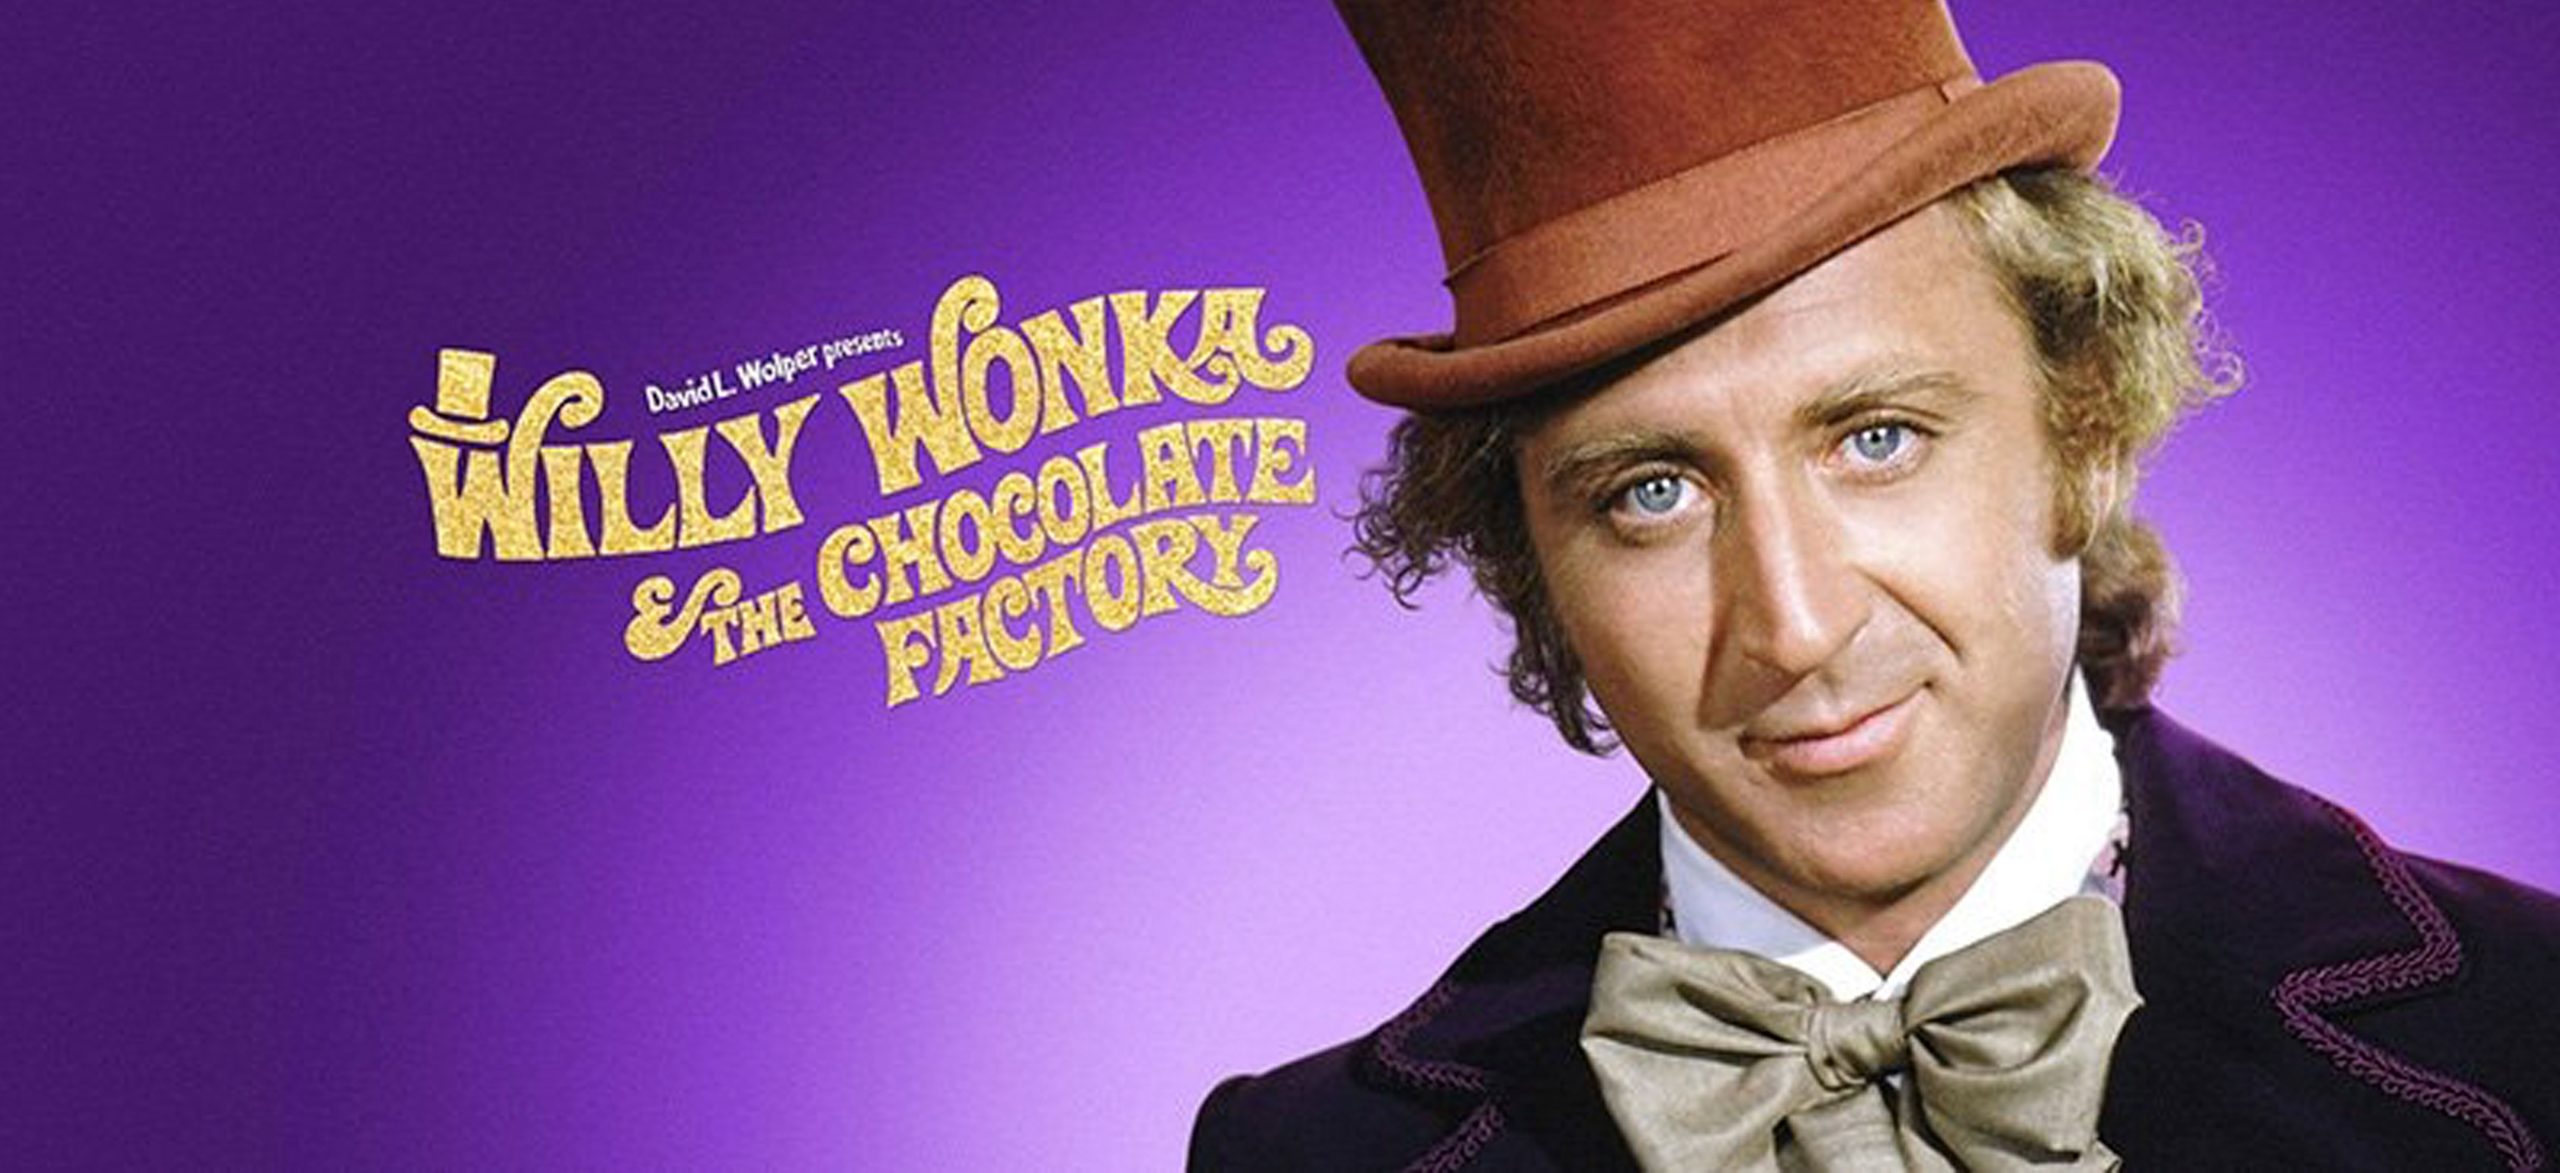 Background image for Movies On The Lawn: Willy Wonka & The Chocolate Factory